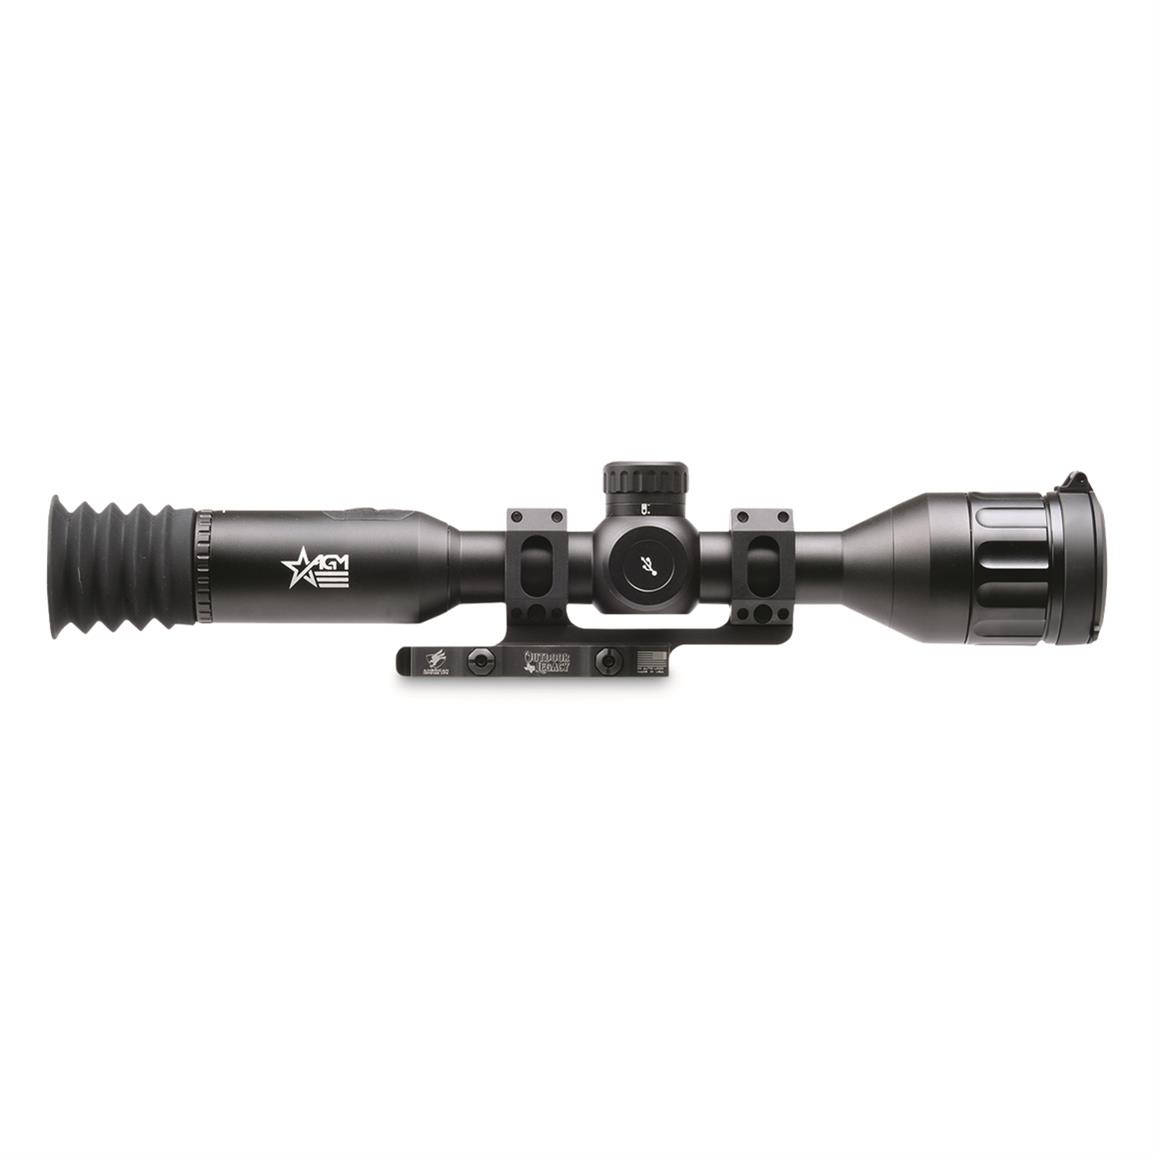 AGM Adder TS-50 384 4-32x50mm Thermal Rifle Scope